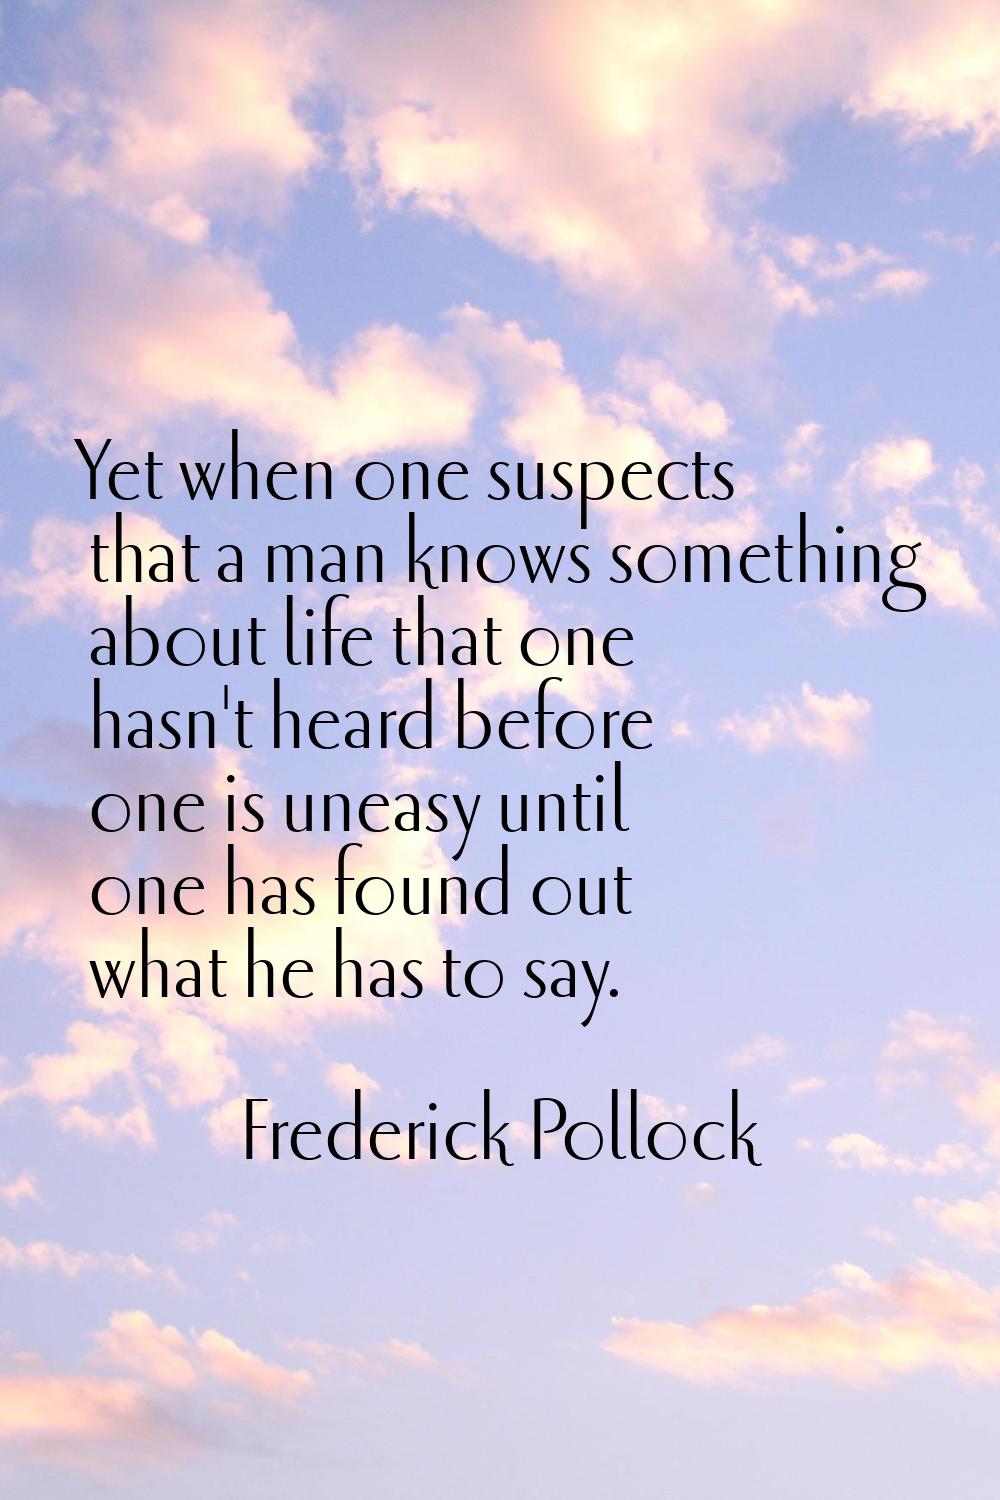 Yet when one suspects that a man knows something about life that one hasn't heard before one is une